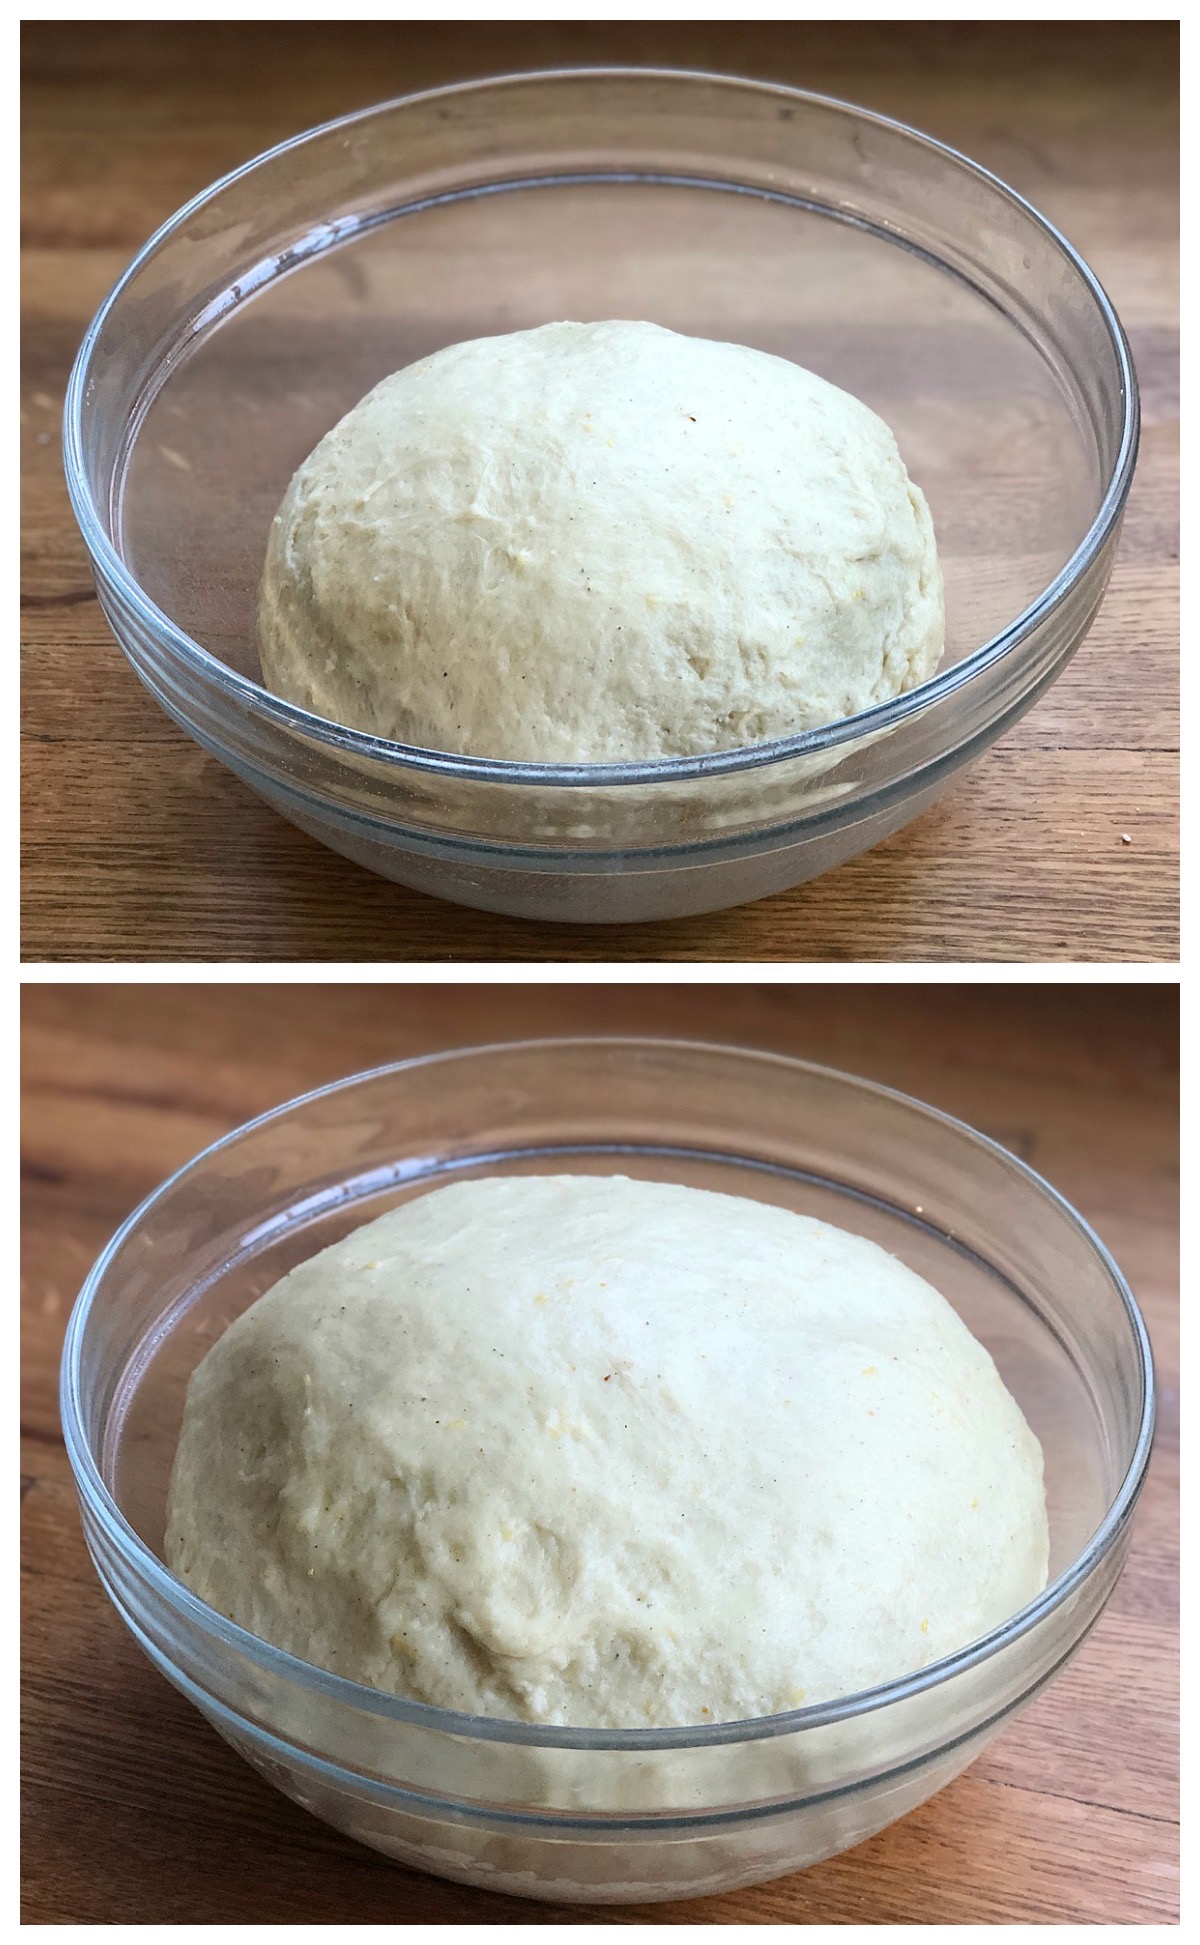 Two pictures: Stollen dough ready to rise in a bowl; stollen dough fully risen.